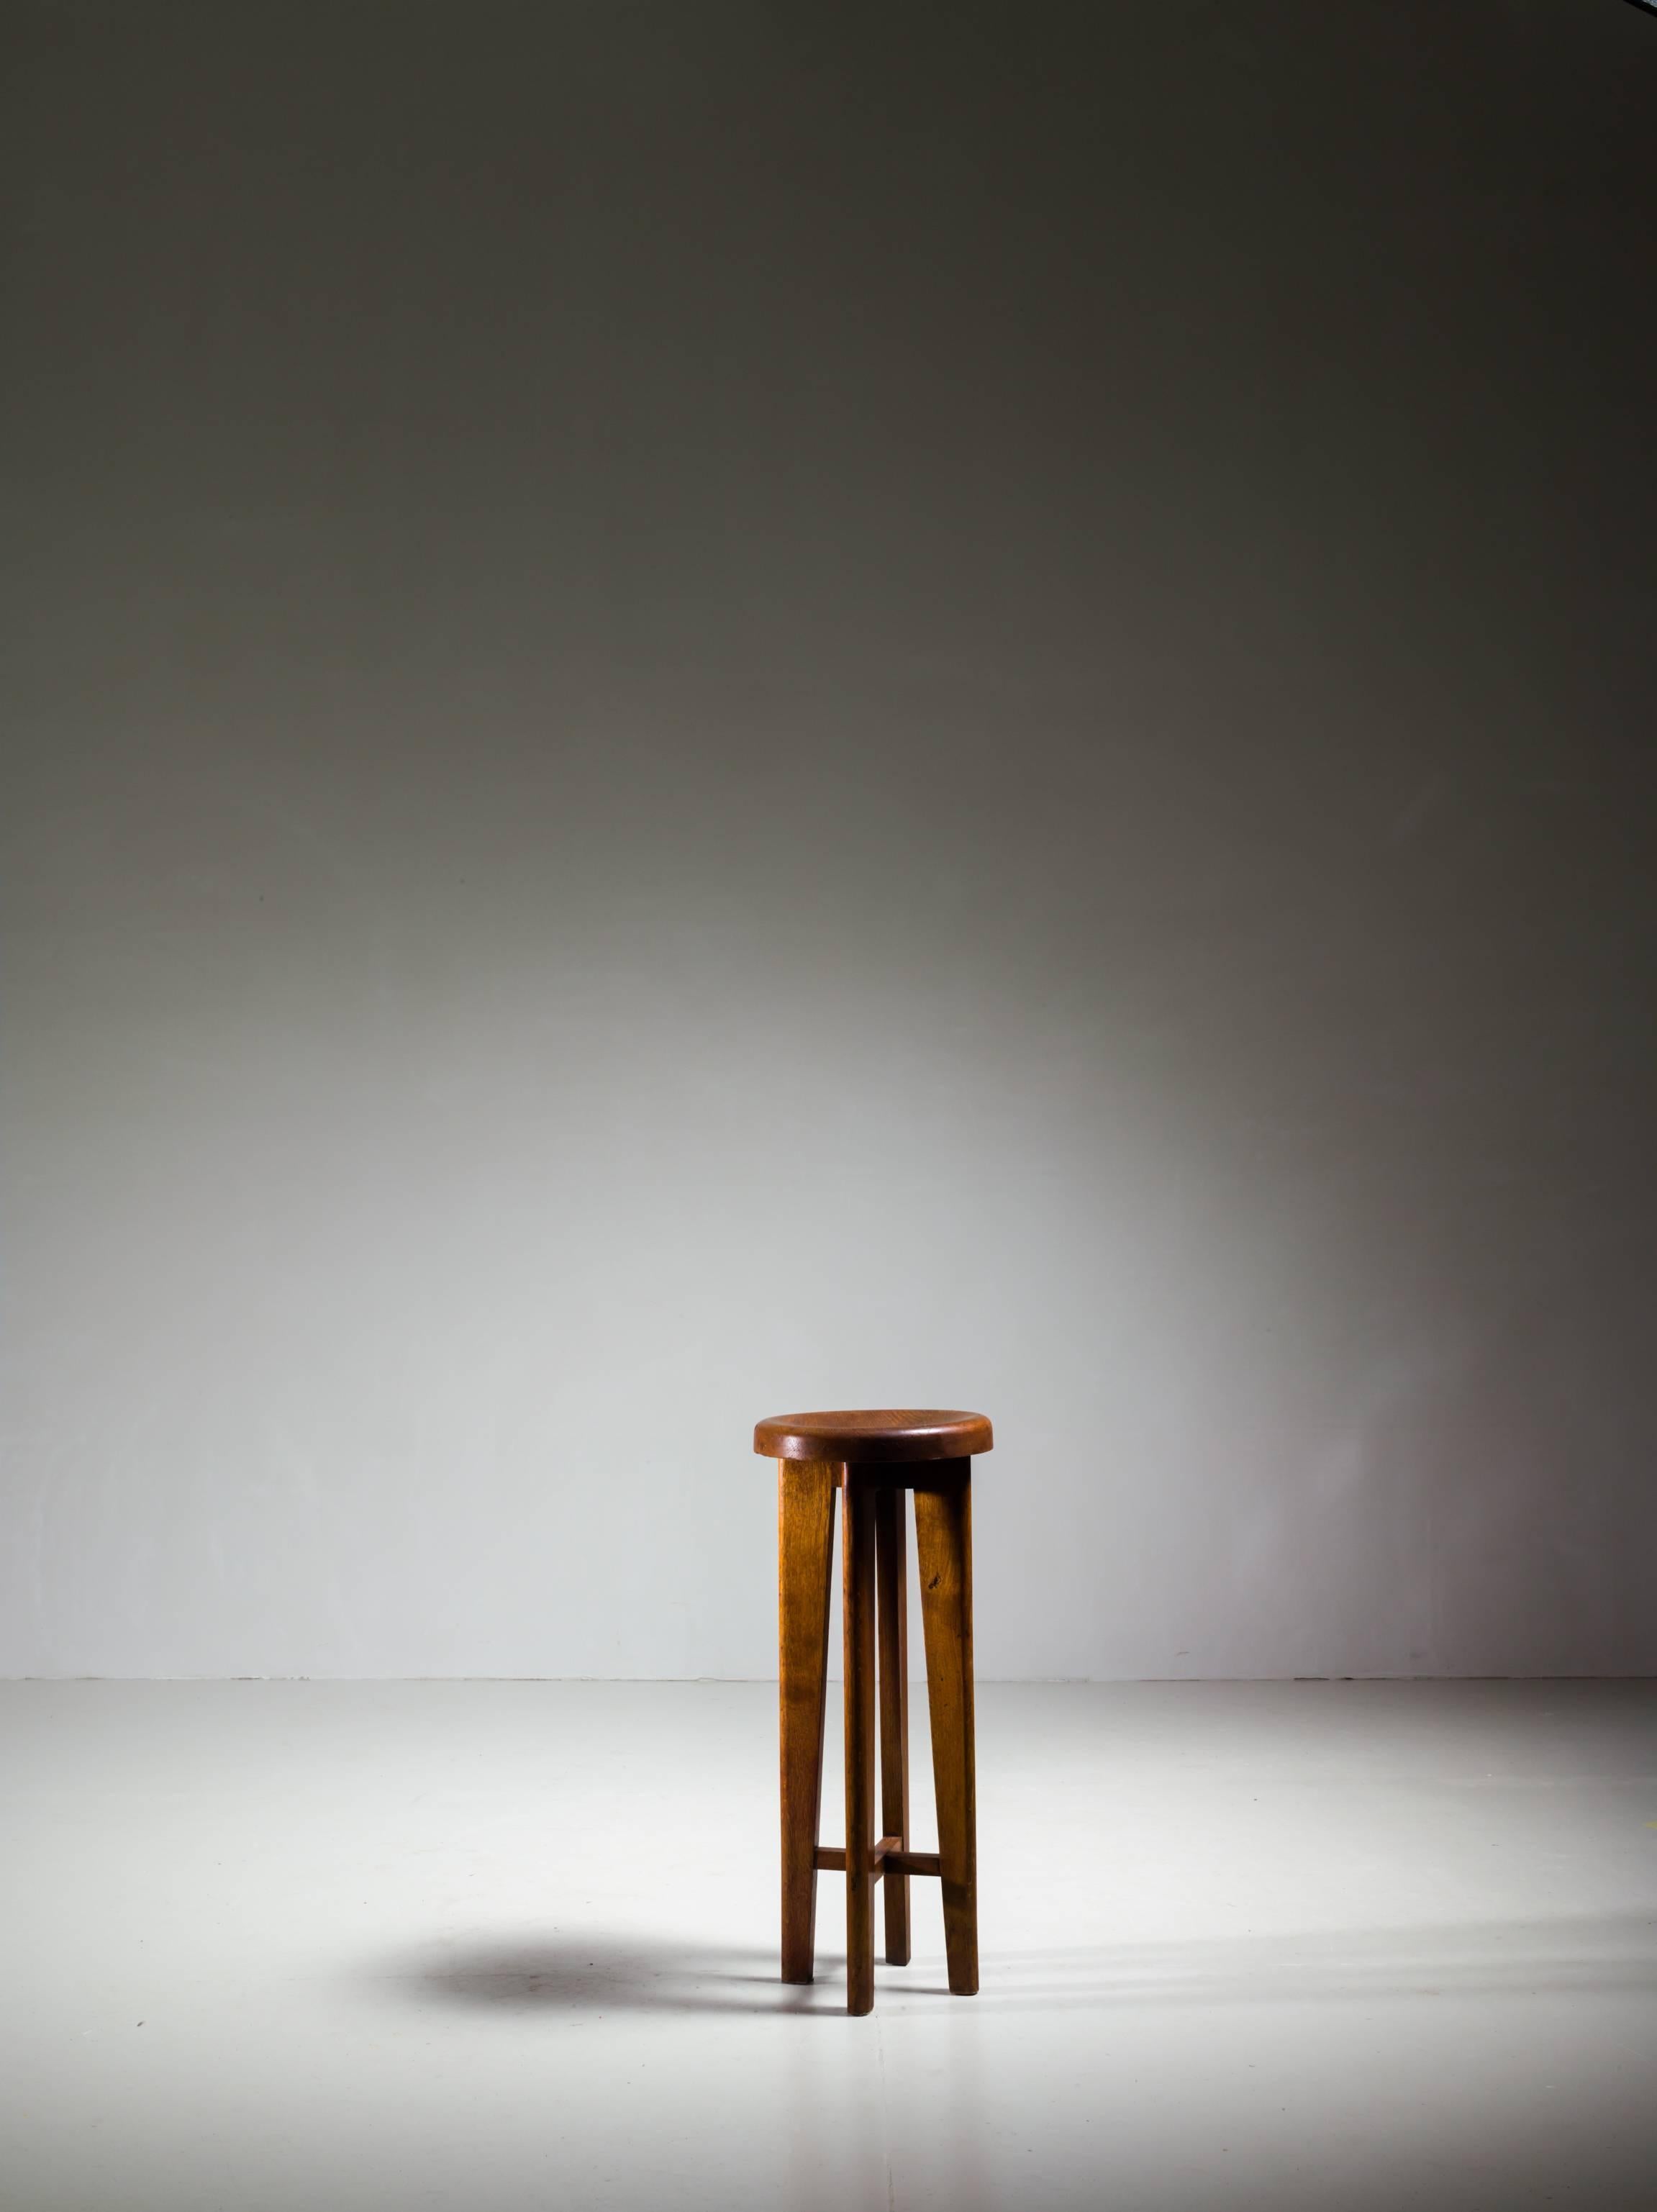 A high French stool in solid oak. High, architectural legs and a wonderful inward curved seat. A beautiful piece with a stunning patina. The stool is reminiscent of the work of Charlotte Perriand and Pierre Jeanneret.
